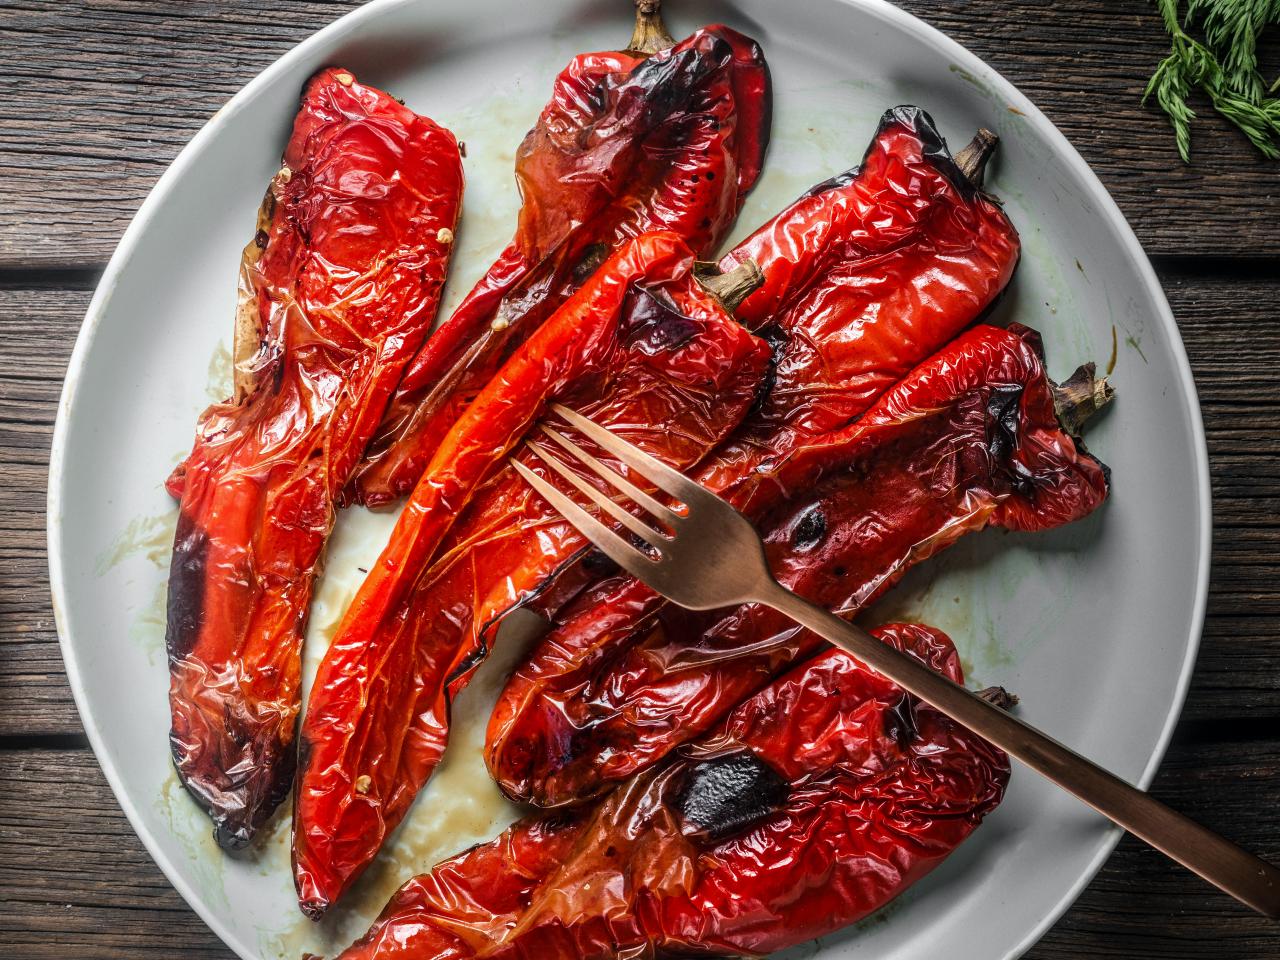 https://food.fnr.sndimg.com/content/dam/images/food/fullset/2023/2/28/fn_getty_roasted_red_peppers.jpg.rend.hgtvcom.1280.960.suffix/1677768590338.jpeg